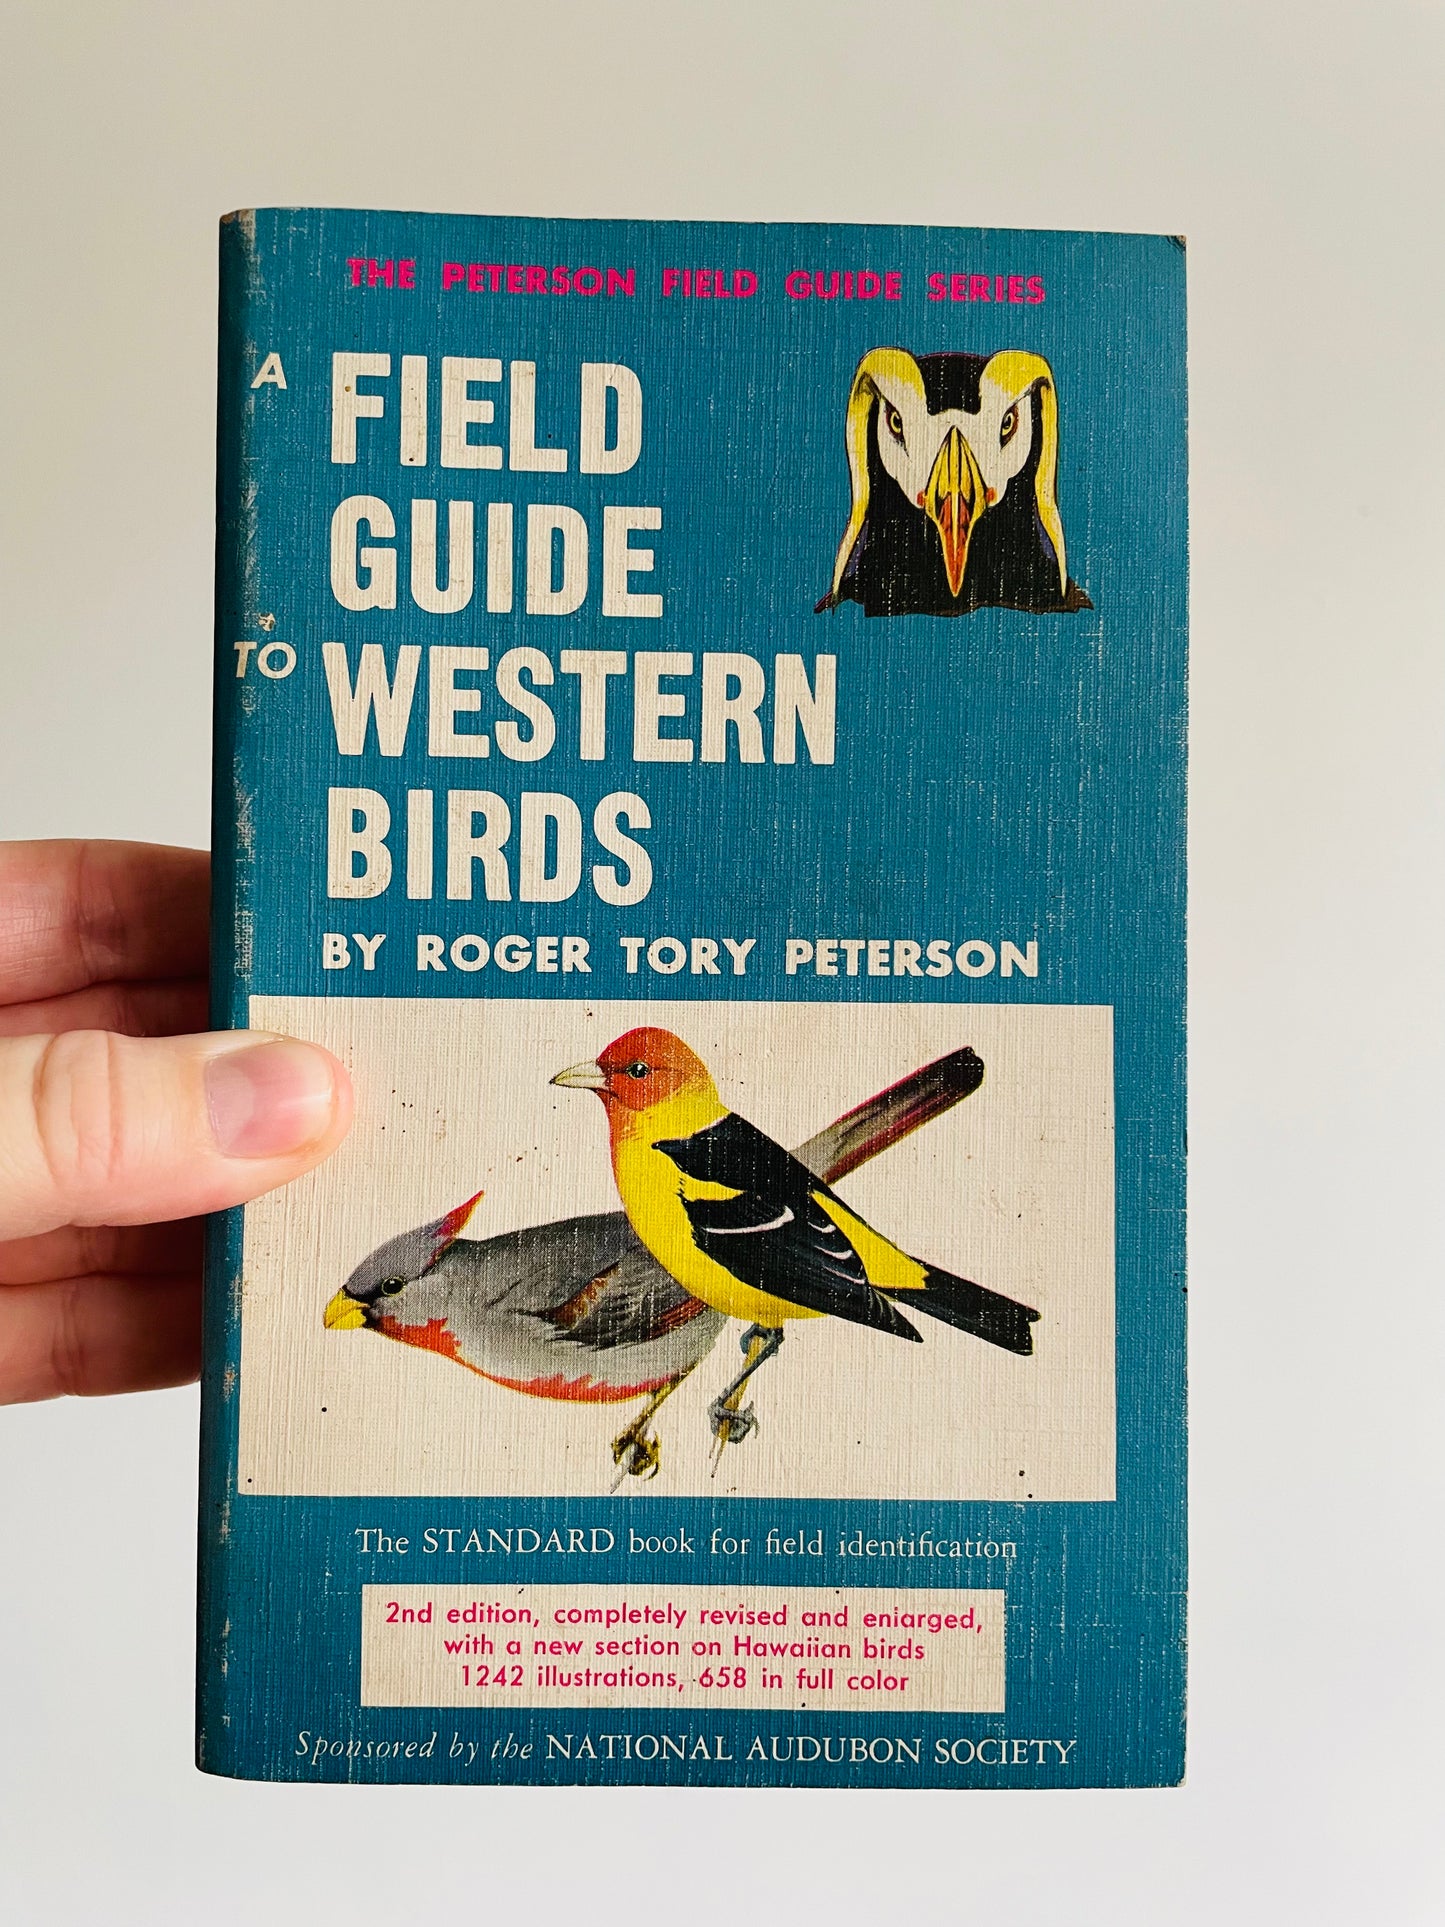 The Peterson Field Guide Series: A Guide to Western Birds Book by Roger Tory Peterson (1961)